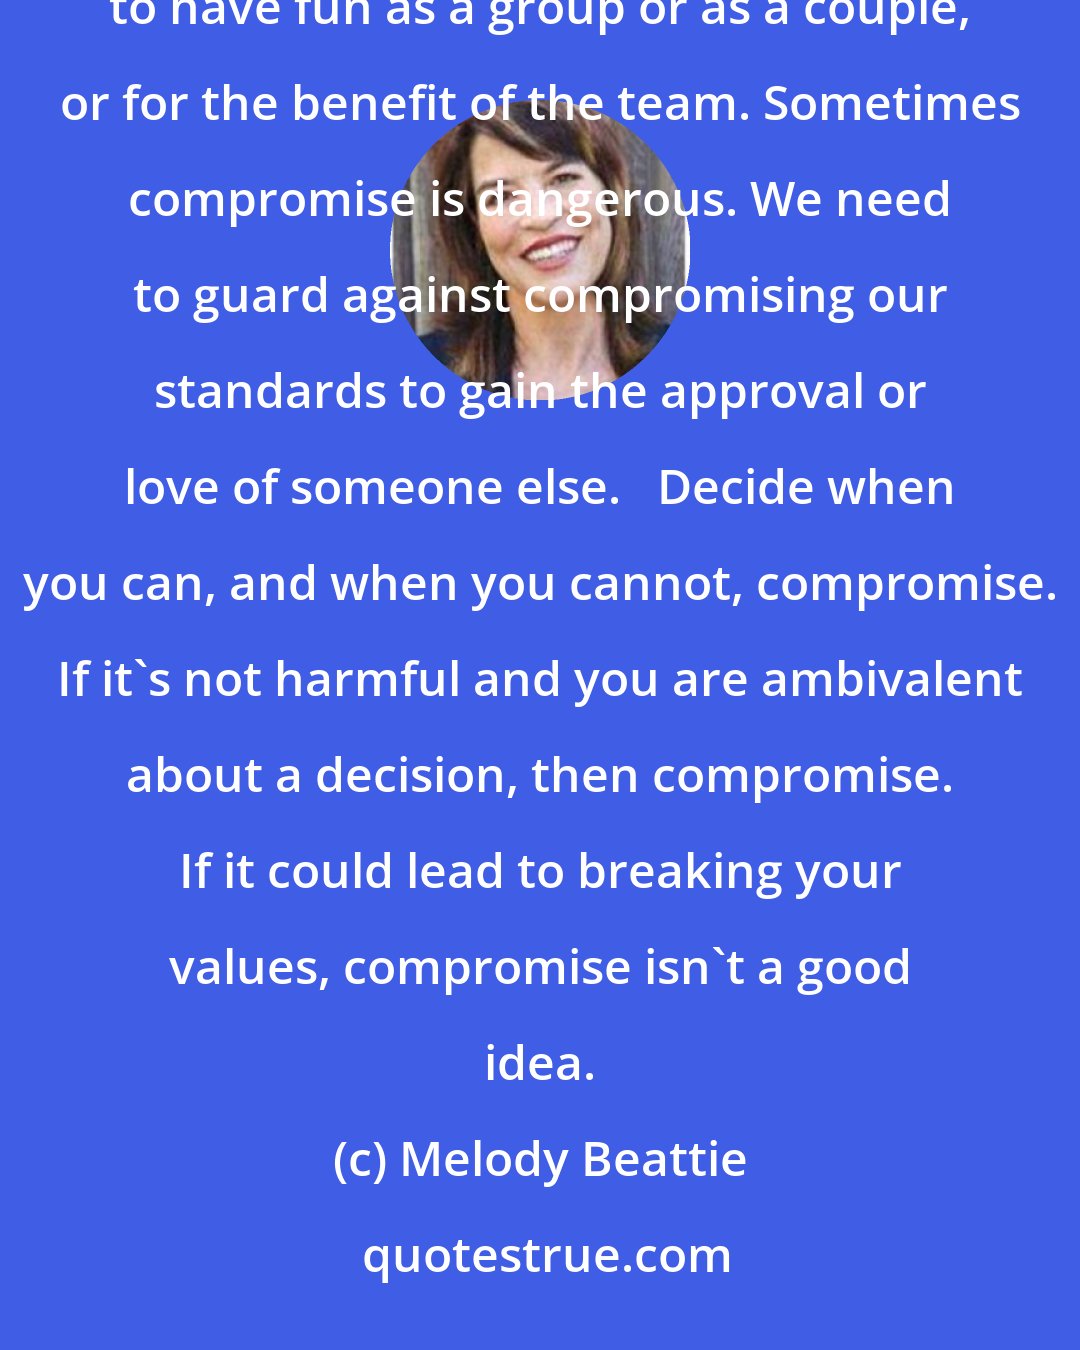 Melody Beattie: Sometimes compromise is important. Sometimes it's better to give in to someone else's wishes in order to have fun as a group or as a couple, or for the benefit of the team. Sometimes compromise is dangerous. We need to guard against compromising our standards to gain the approval or love of someone else.   Decide when you can, and when you cannot, compromise. If it's not harmful and you are ambivalent about a decision, then compromise. If it could lead to breaking your values, compromise isn't a good idea.